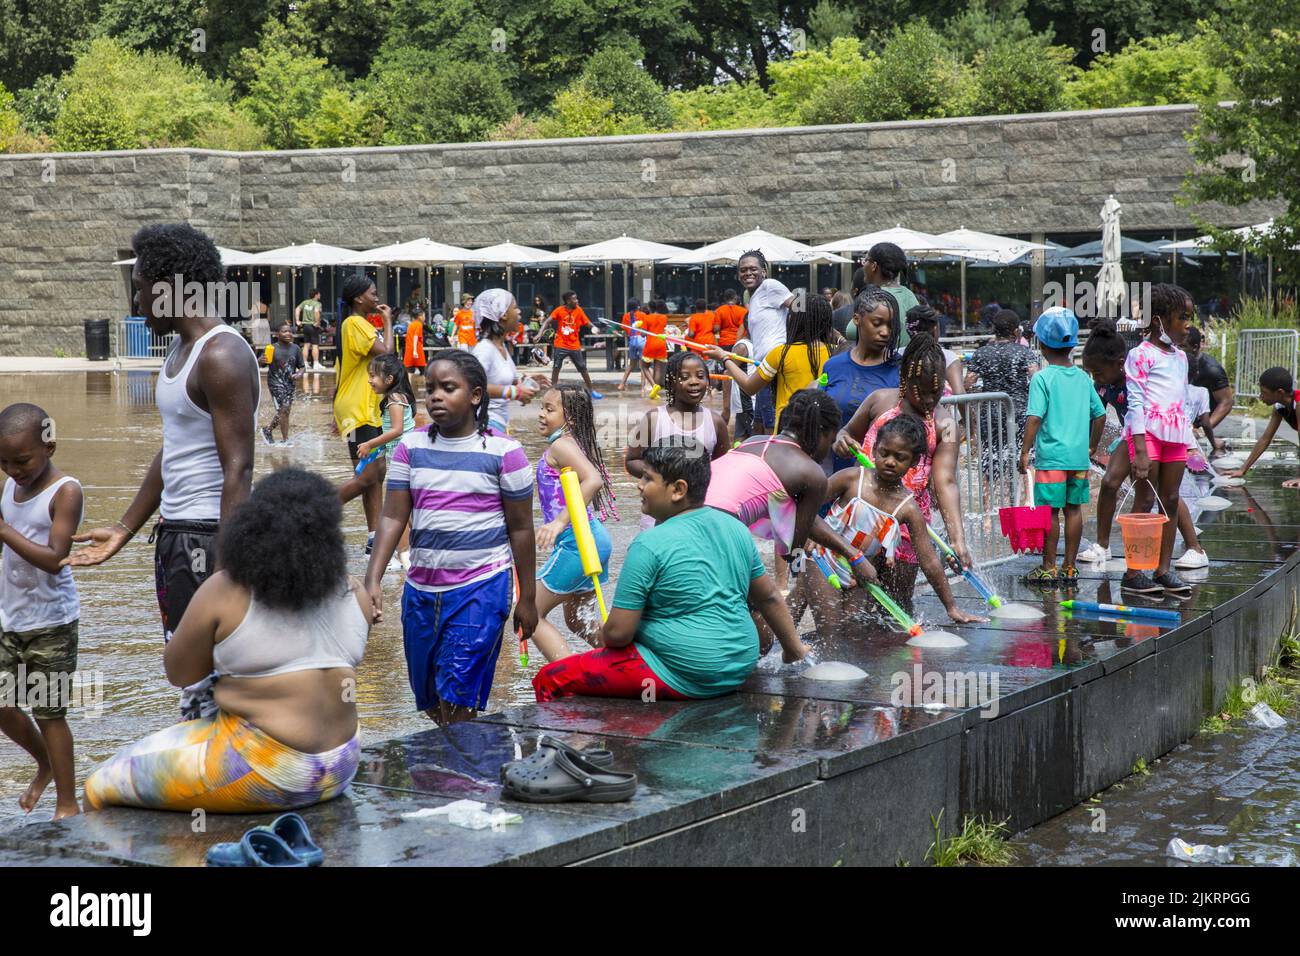 Children having fun and cooling off on a very hot summer day in the waterpark at the LeFrak Center at Lakeside in Prospect Park, Brooklyn, New York Stock Photo